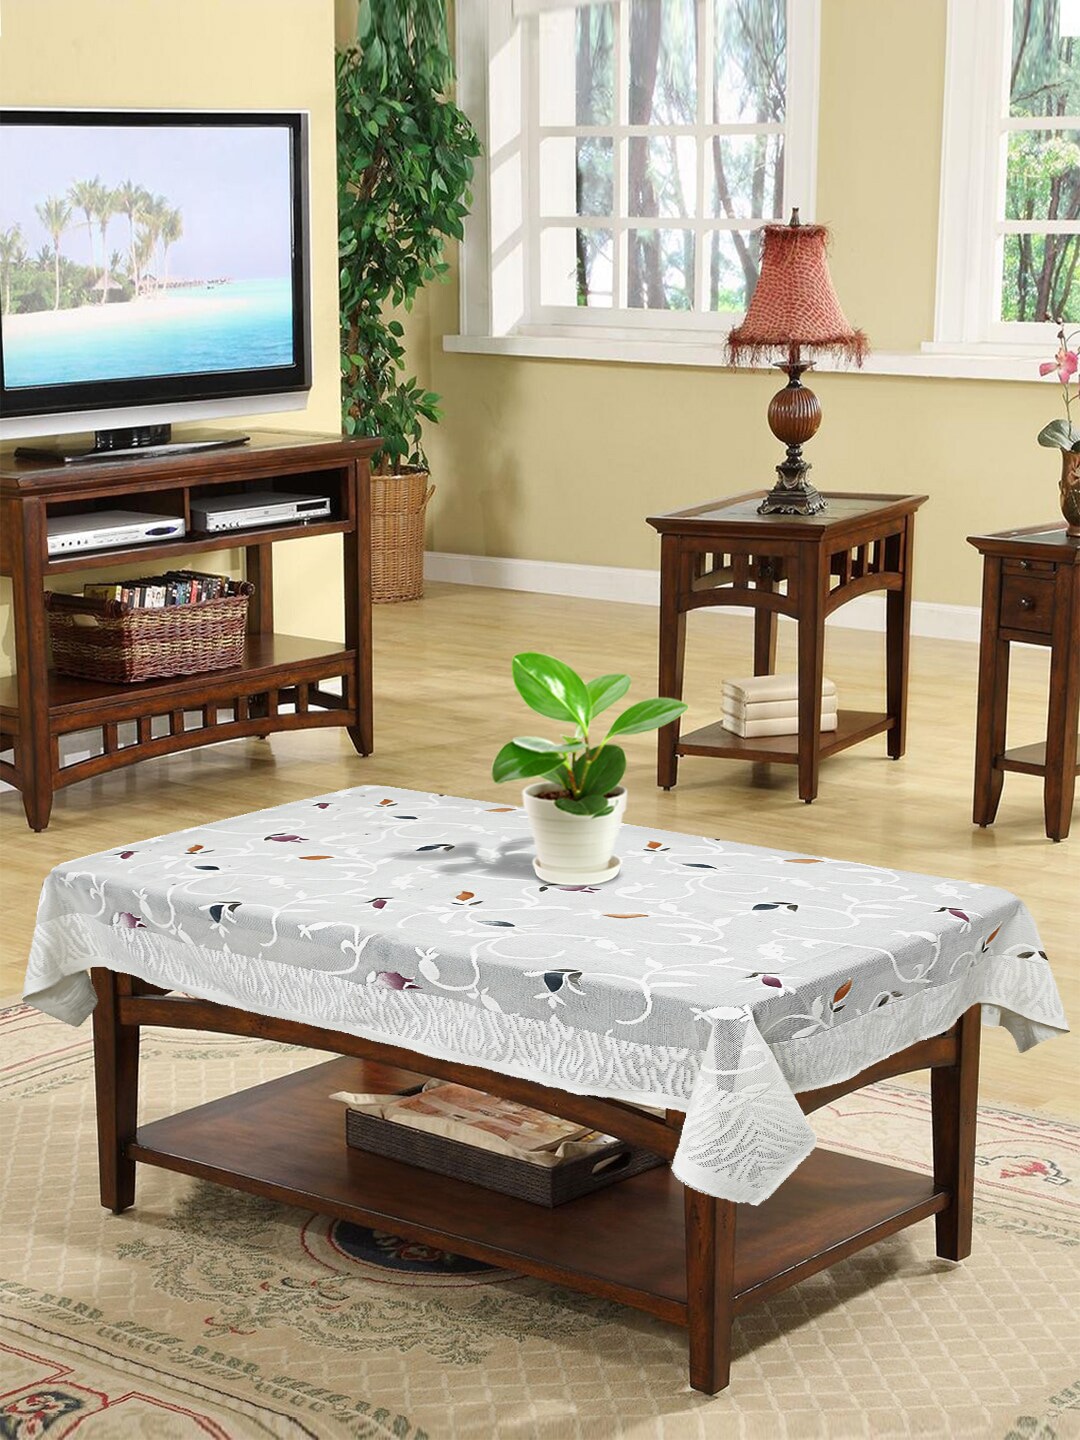 Kuber Industries White Printed 4 Seater Cotton Table Cover Price in India